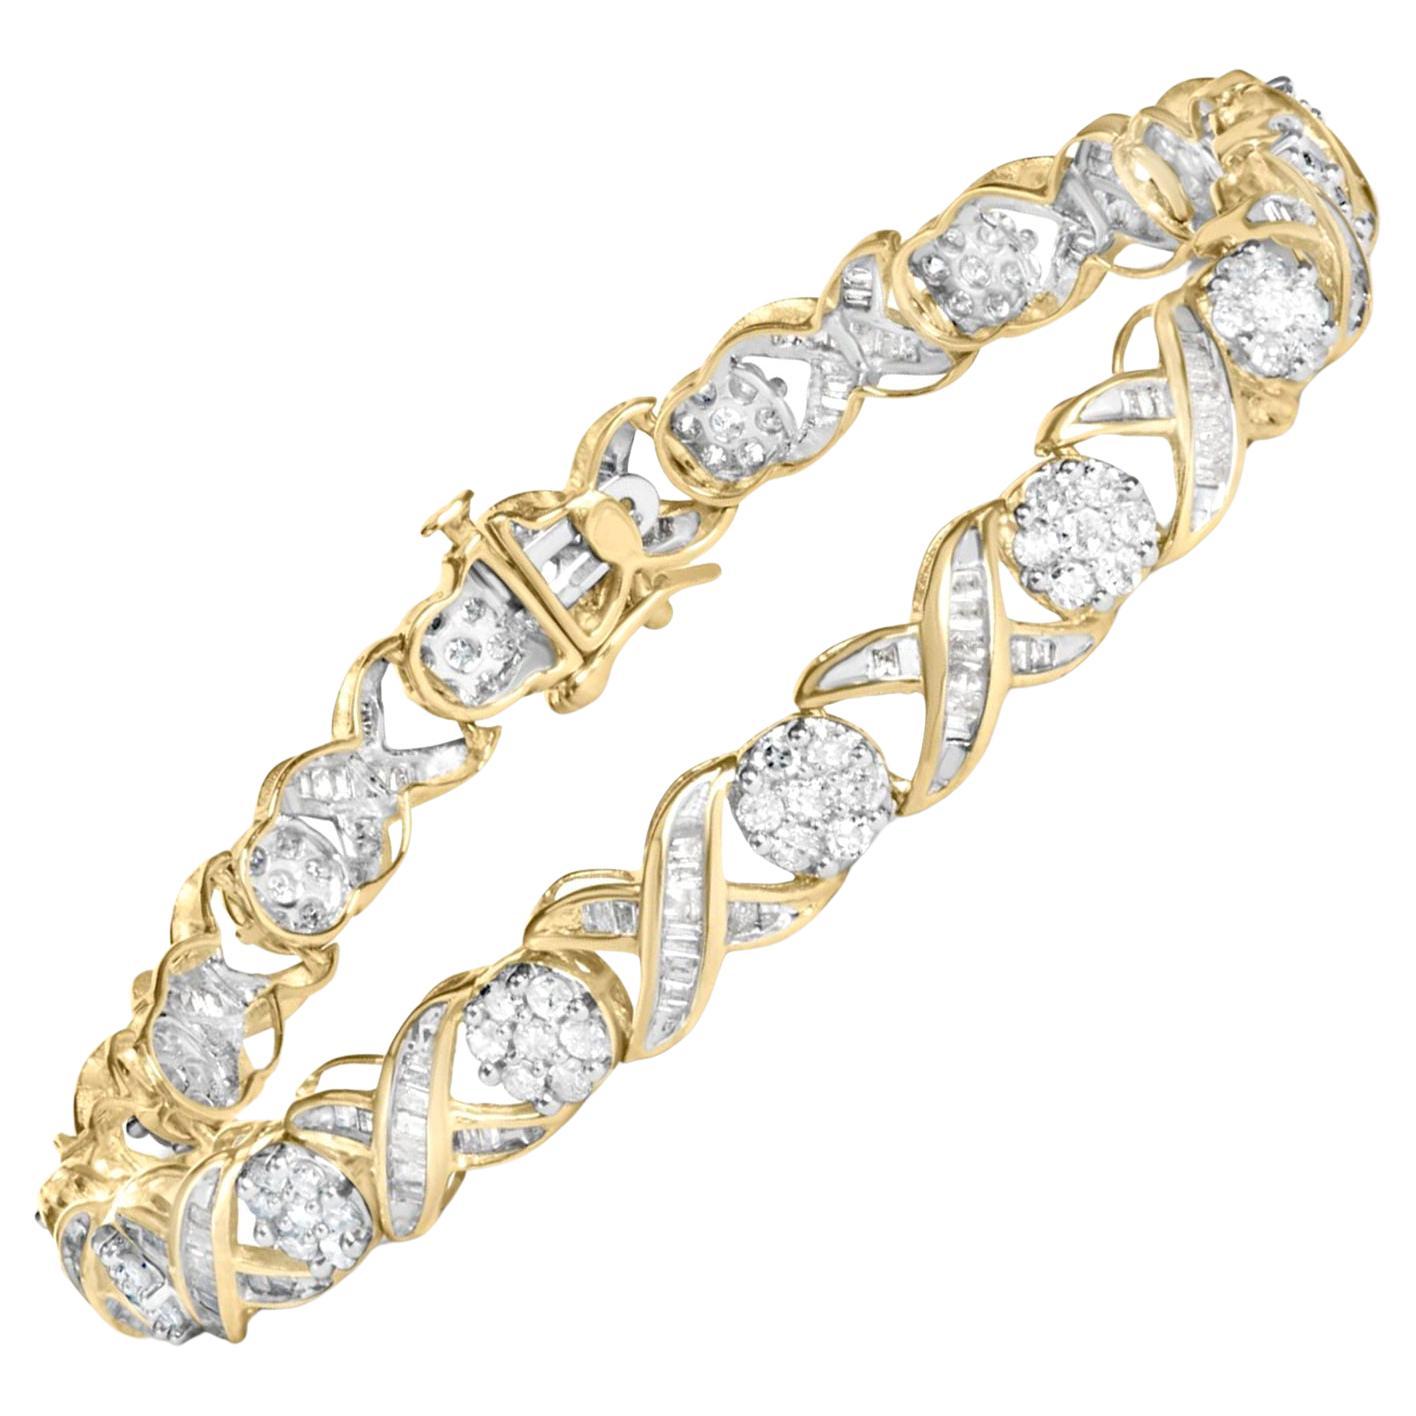 XOXO Diamond Link Bracelet Round and Baguette Cut 3 Carats 10K Yellow Gold For Sale